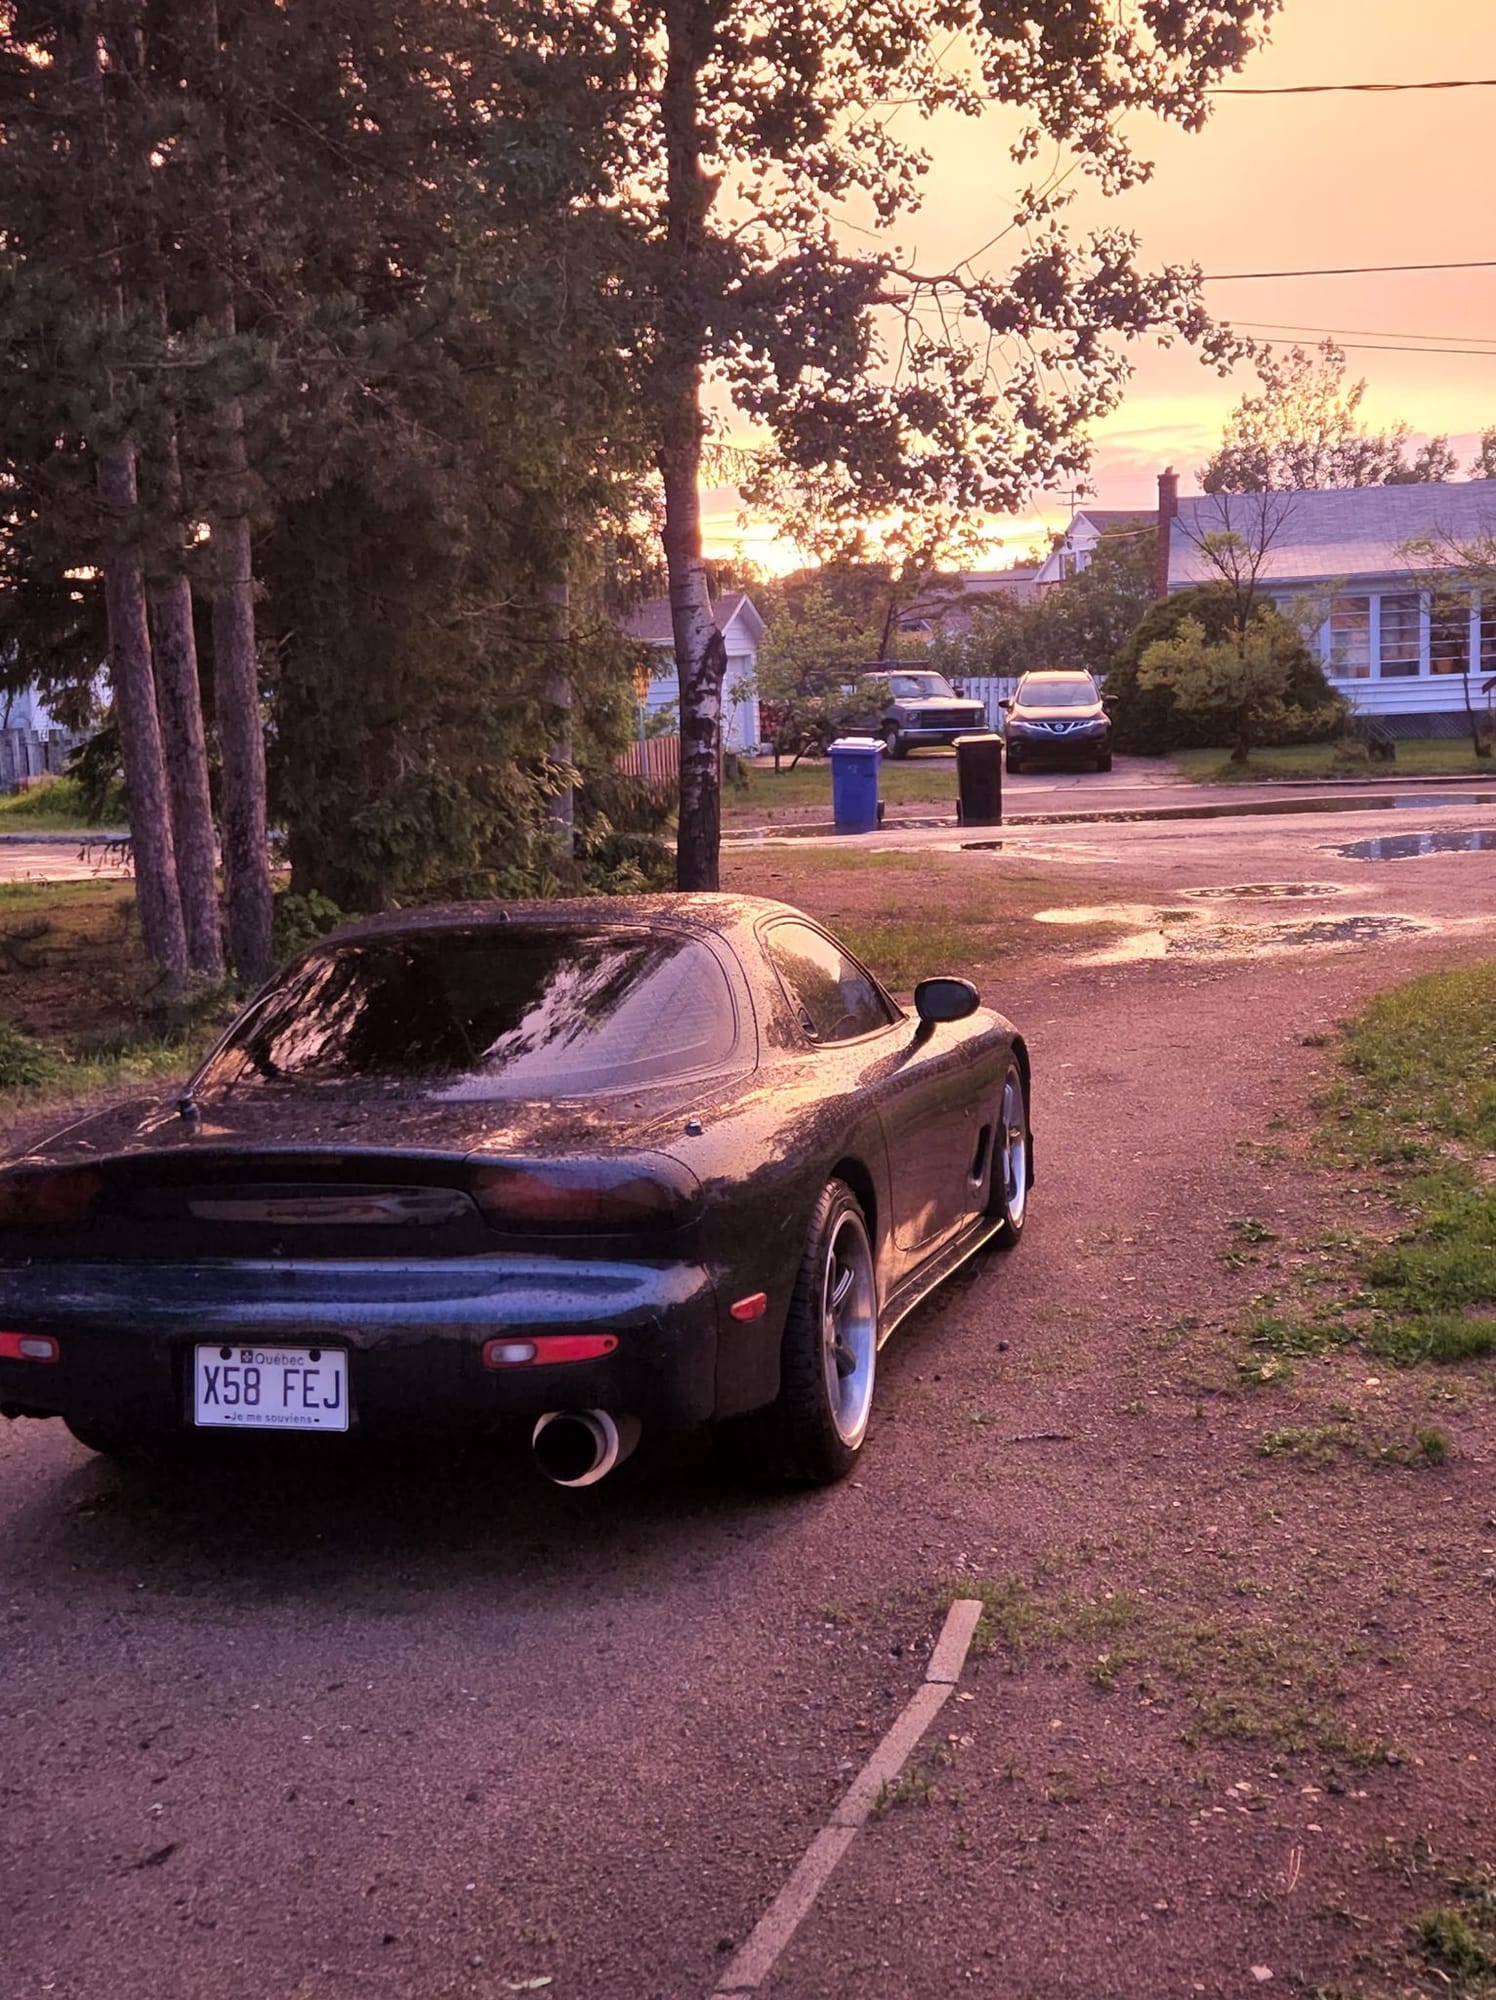 1993 Mazda RX-7 - rx7 fd LHD(left hand drive) 40 000$ - Used - VIN JM1Fd3329P0205128 - 123,000 Miles - 2 cyl - 2WD - Manual - Coupe - Blue - Forestville, QC G0T 1E, Canada